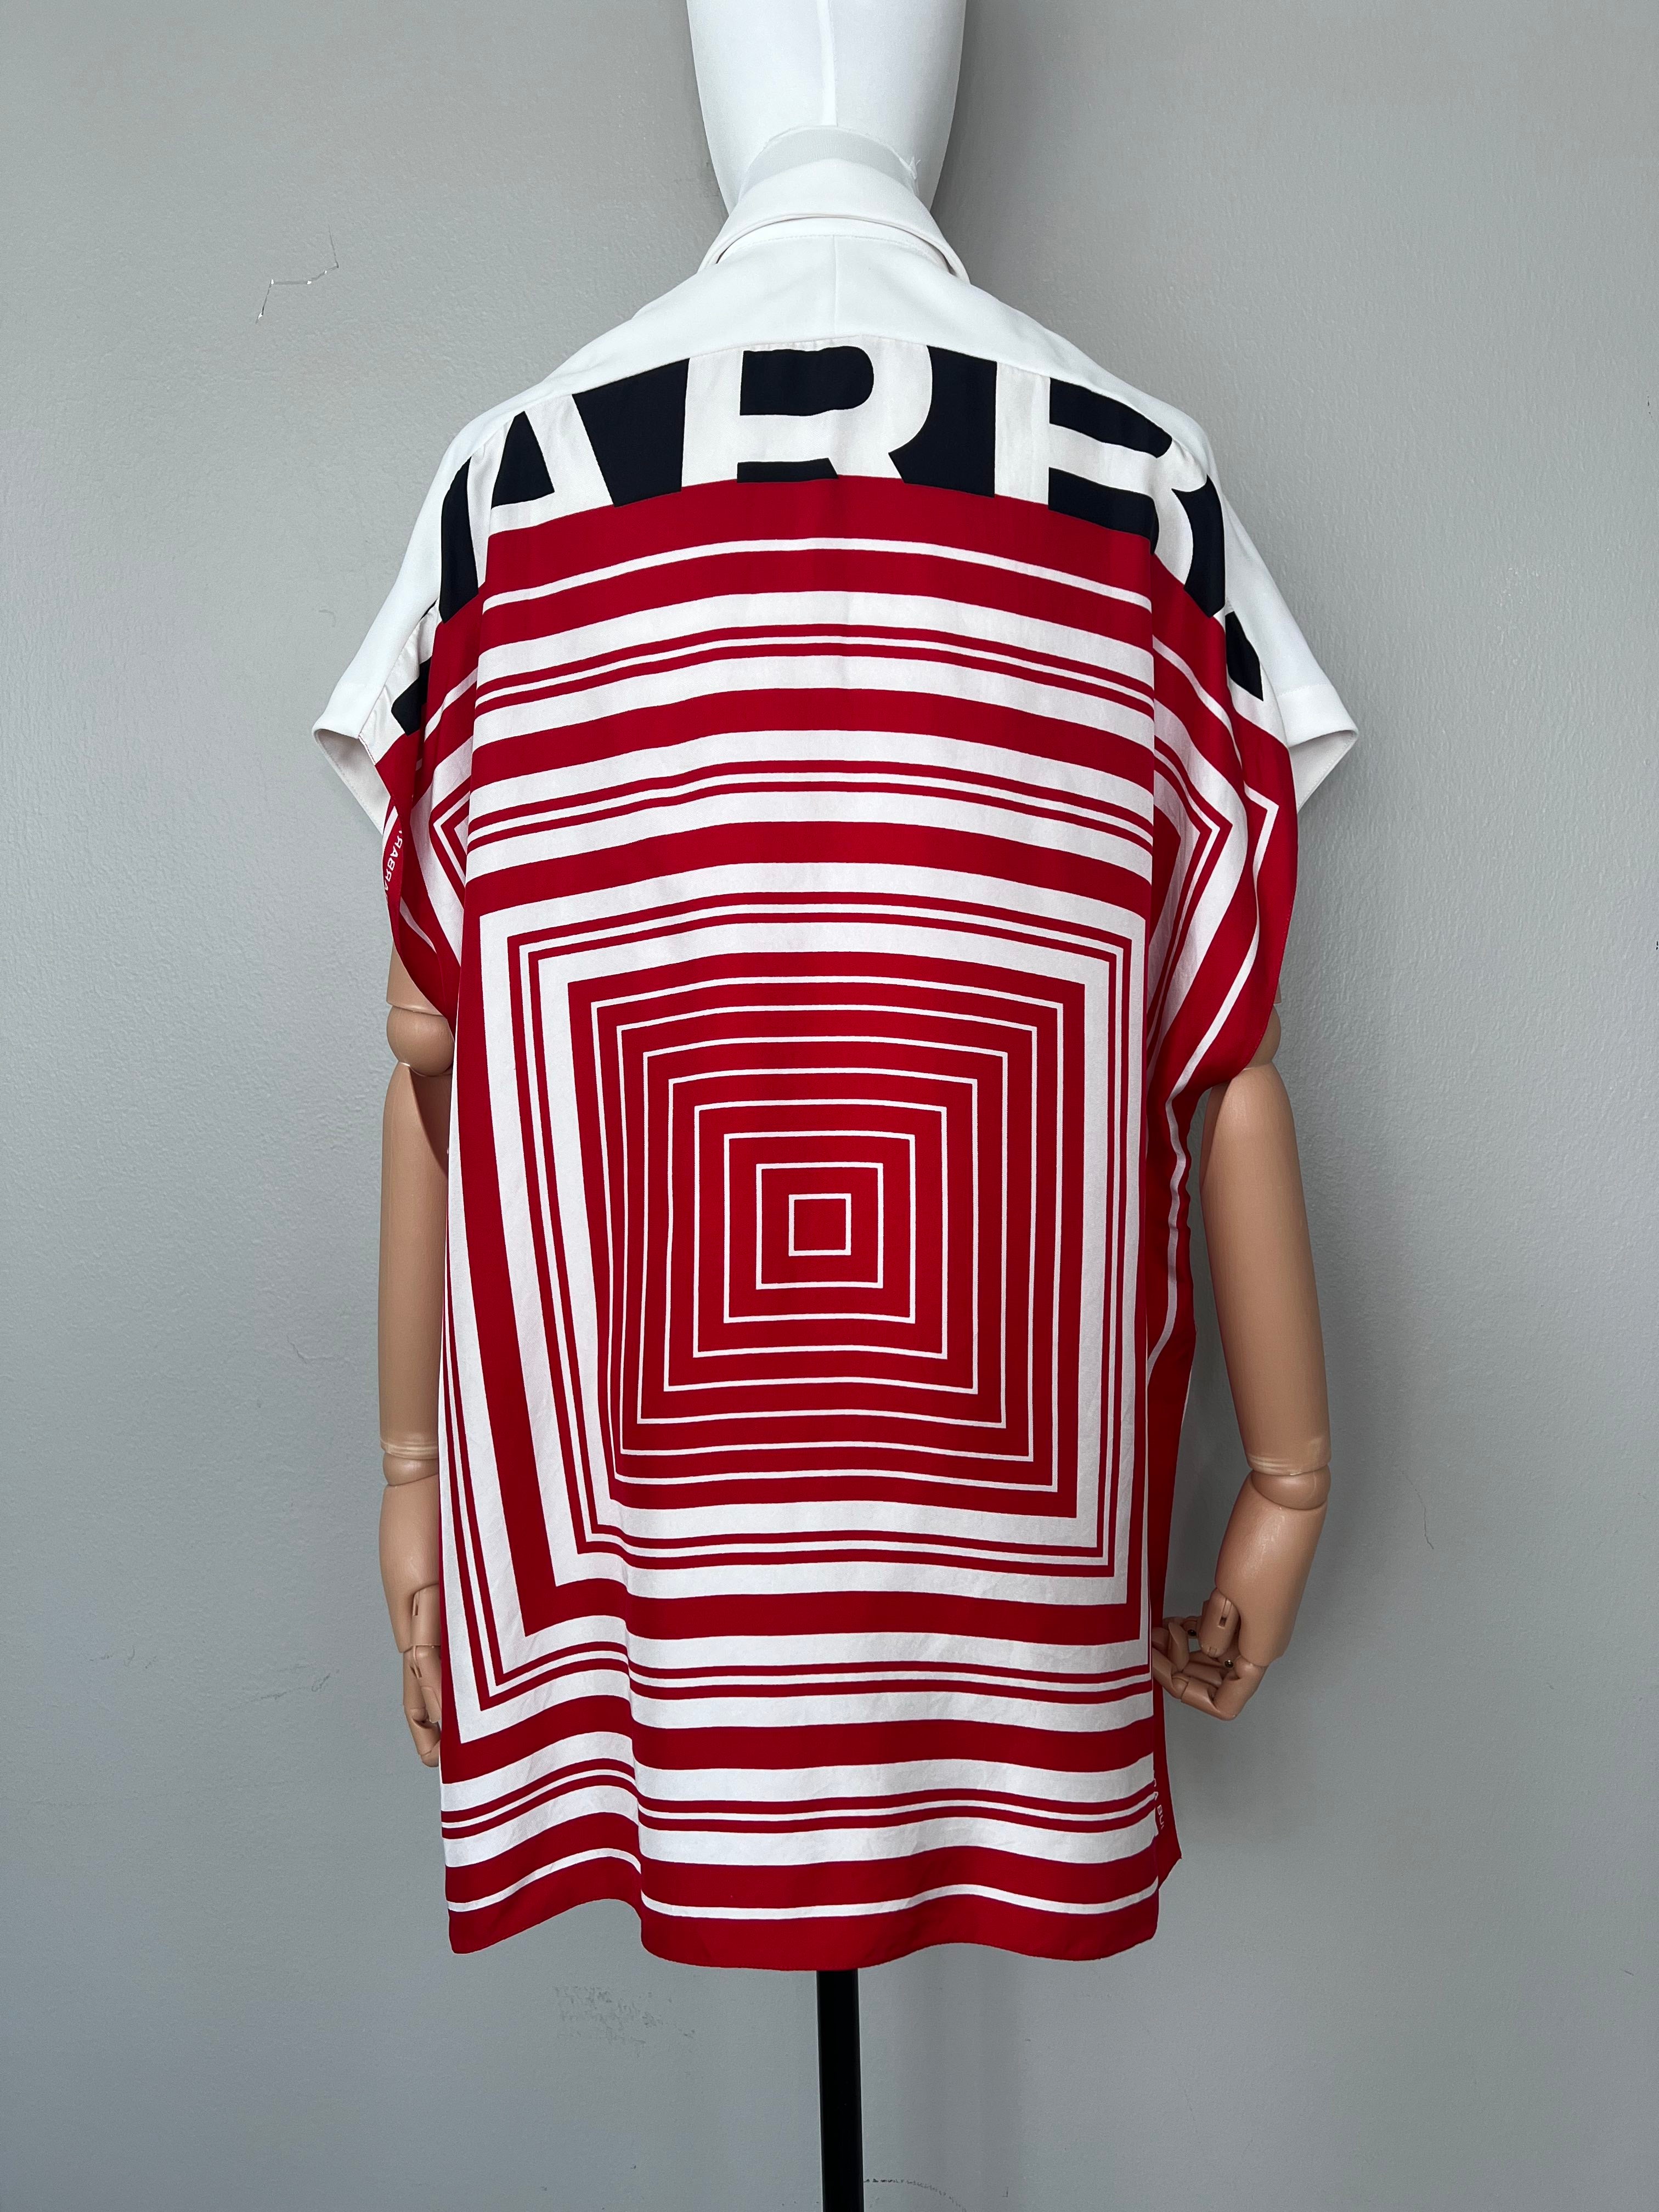 White dress shirt with unique red design draping - BARBARA BUI